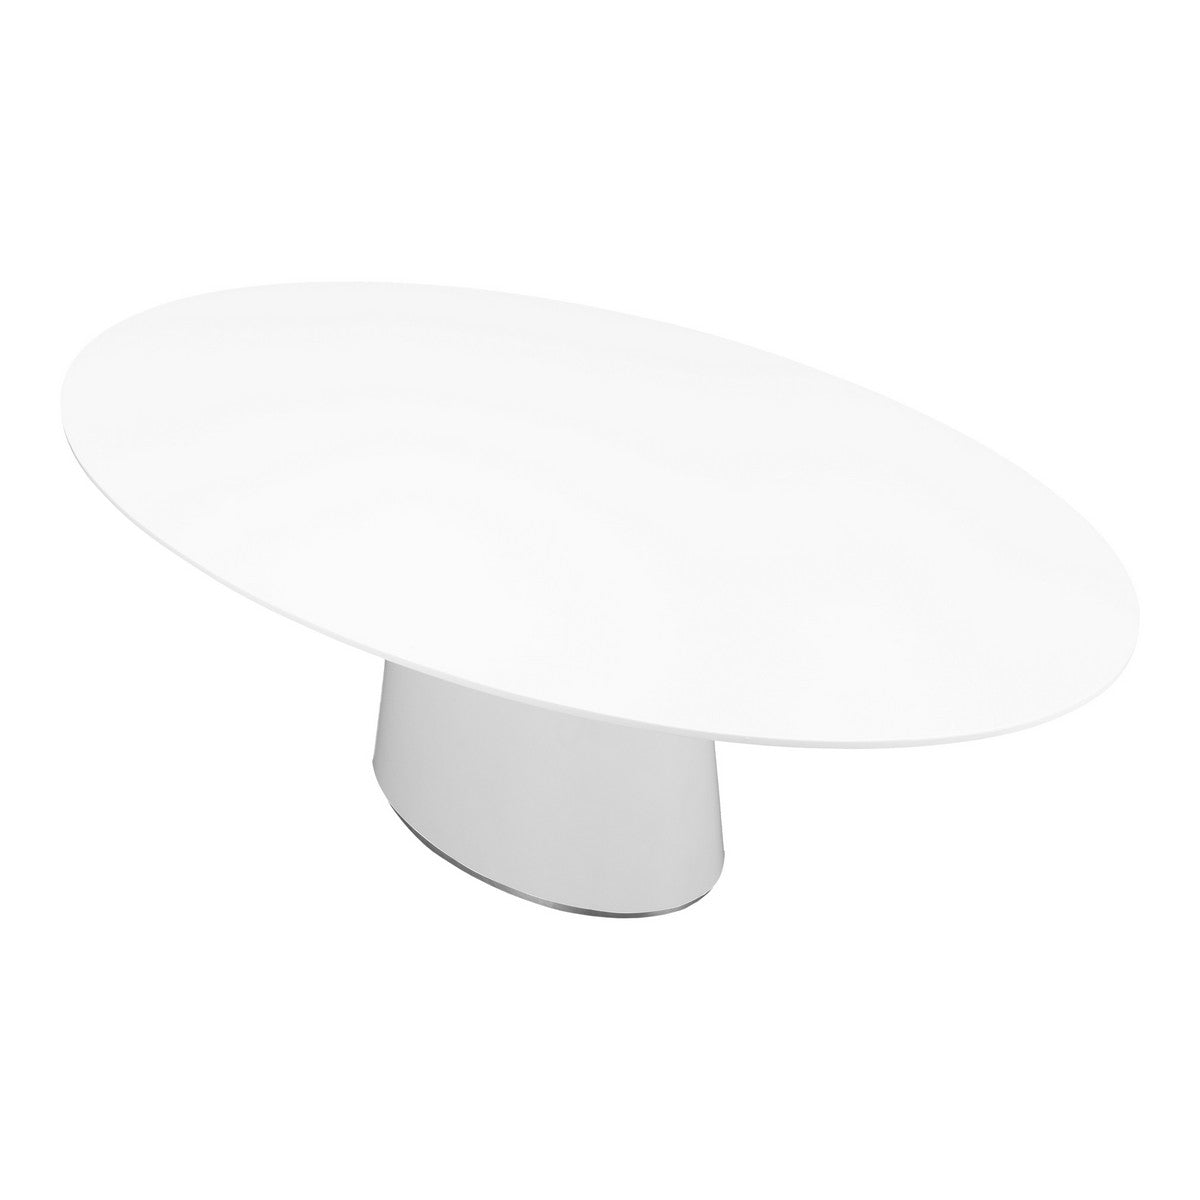 Moe's Home Collection Otago Oval Dining Table White - KC-1007-18